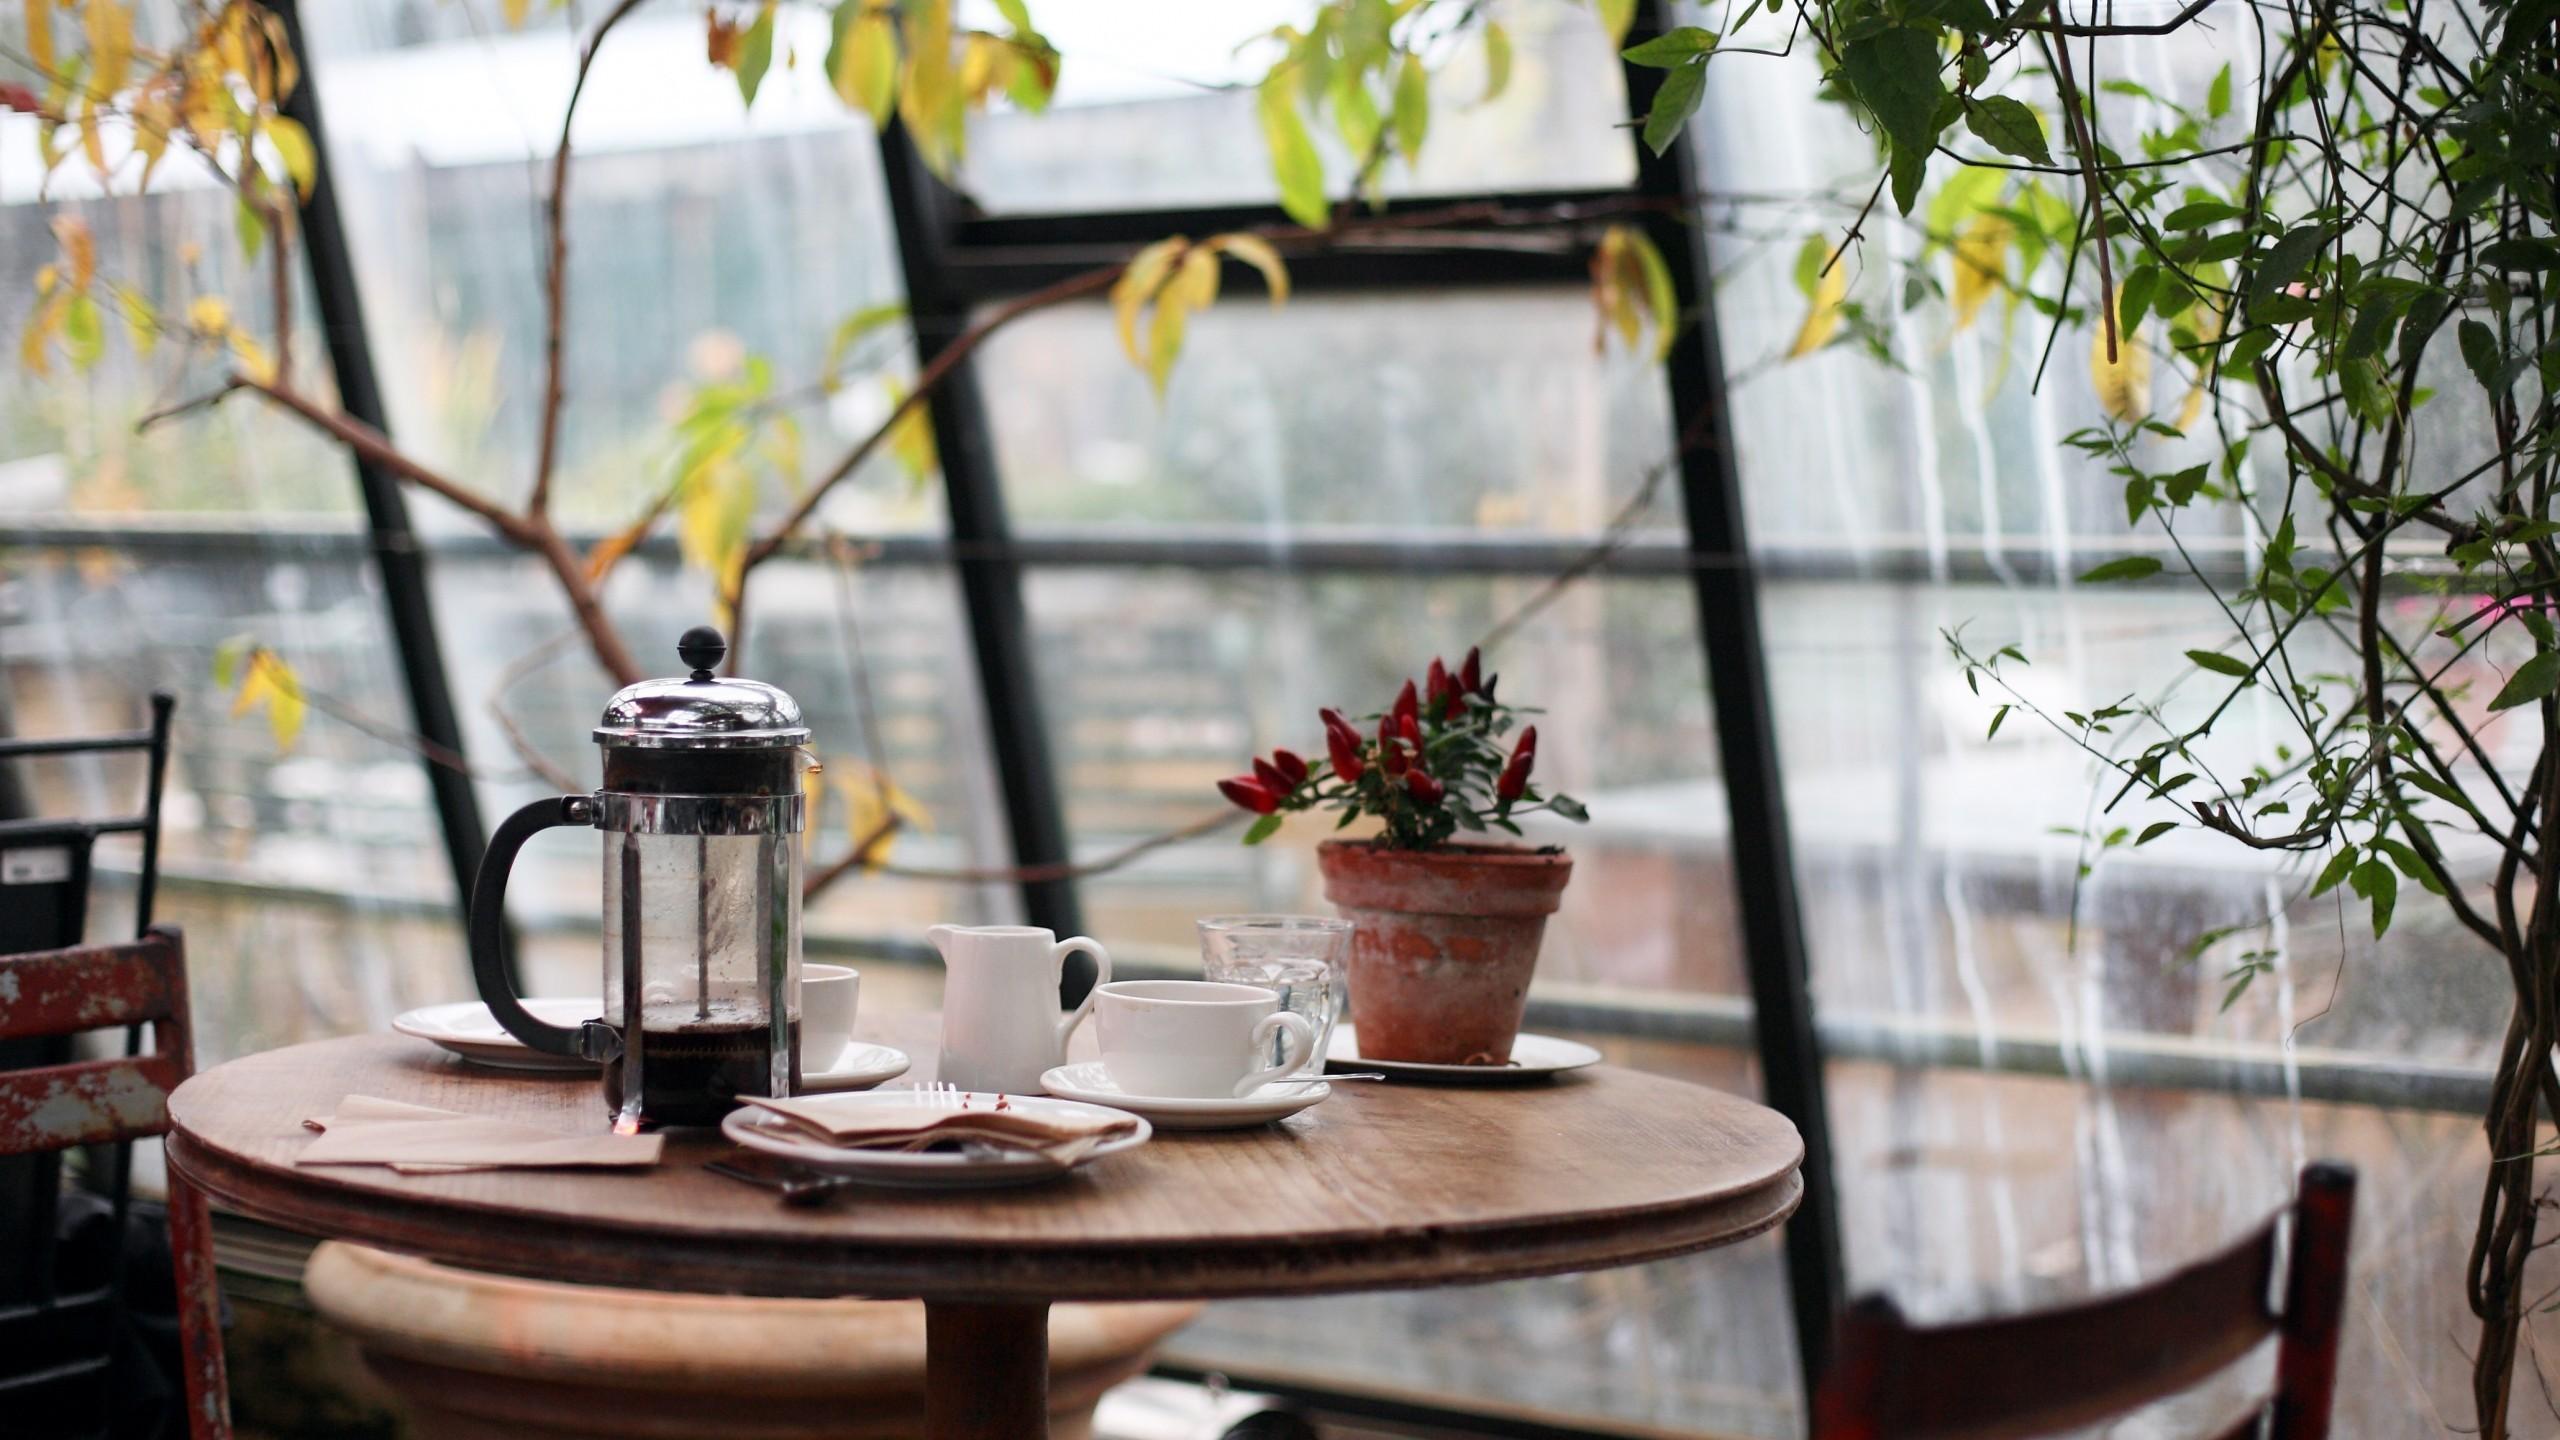 Download 2560x1440 Coffee Shop, Desk, Rainy Day, Table Wallpaper